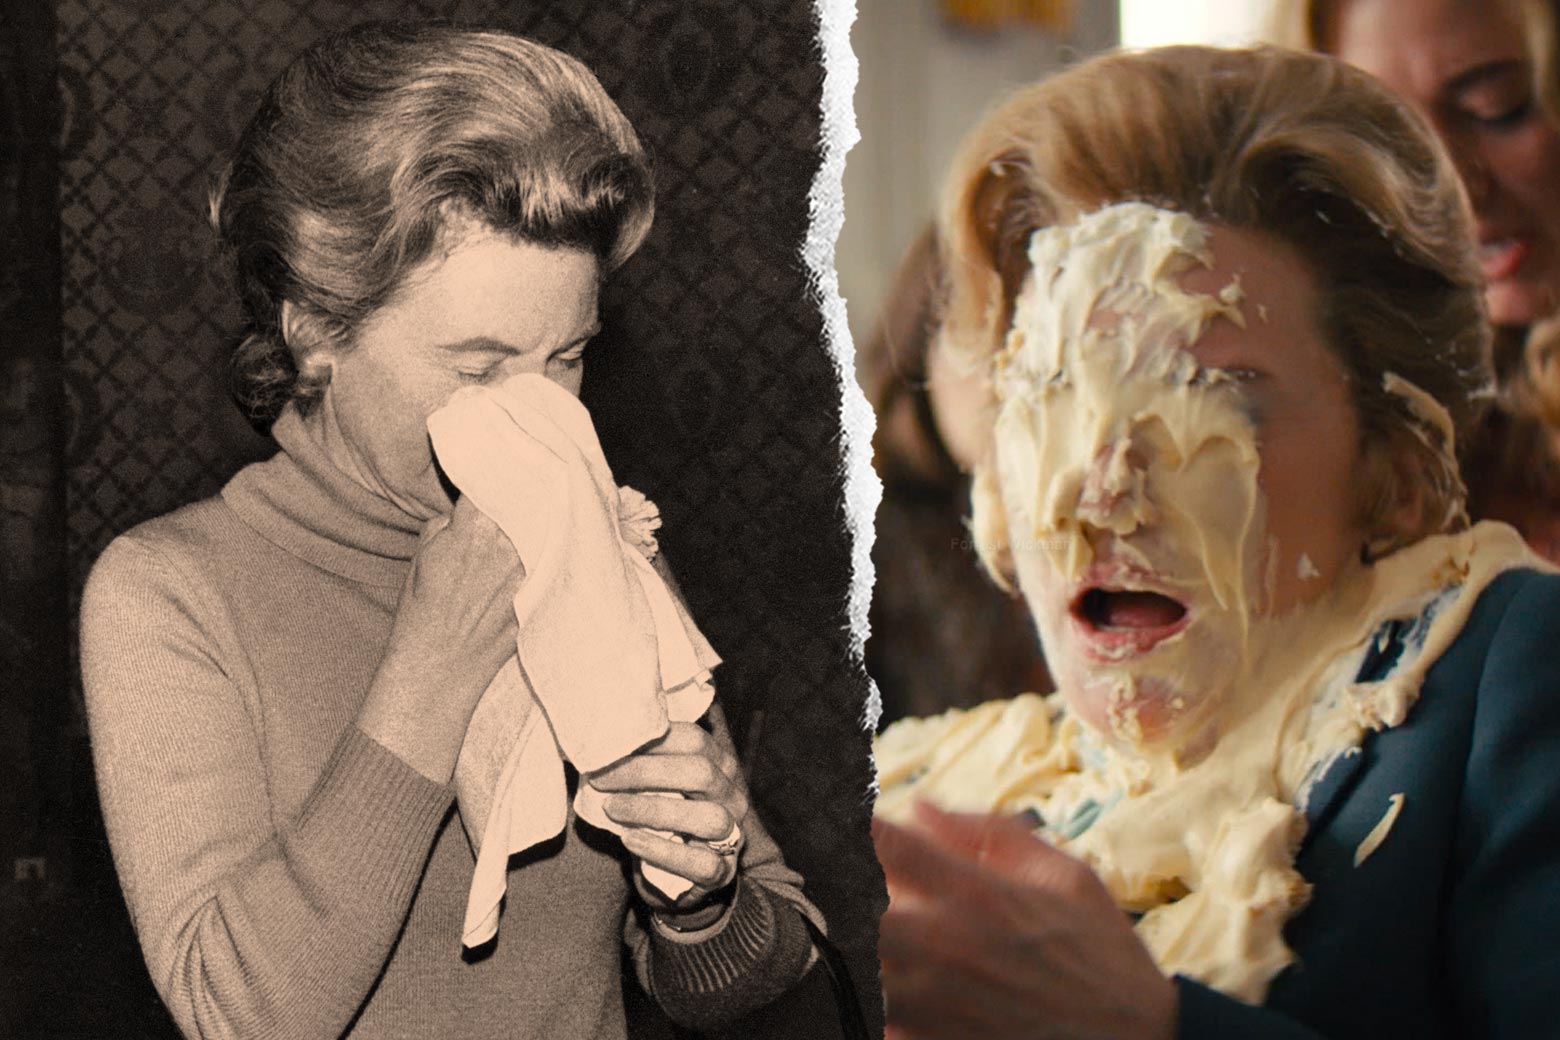 Phyllis Schlafly and Cate Blanchette, both after getting a pie in the face.